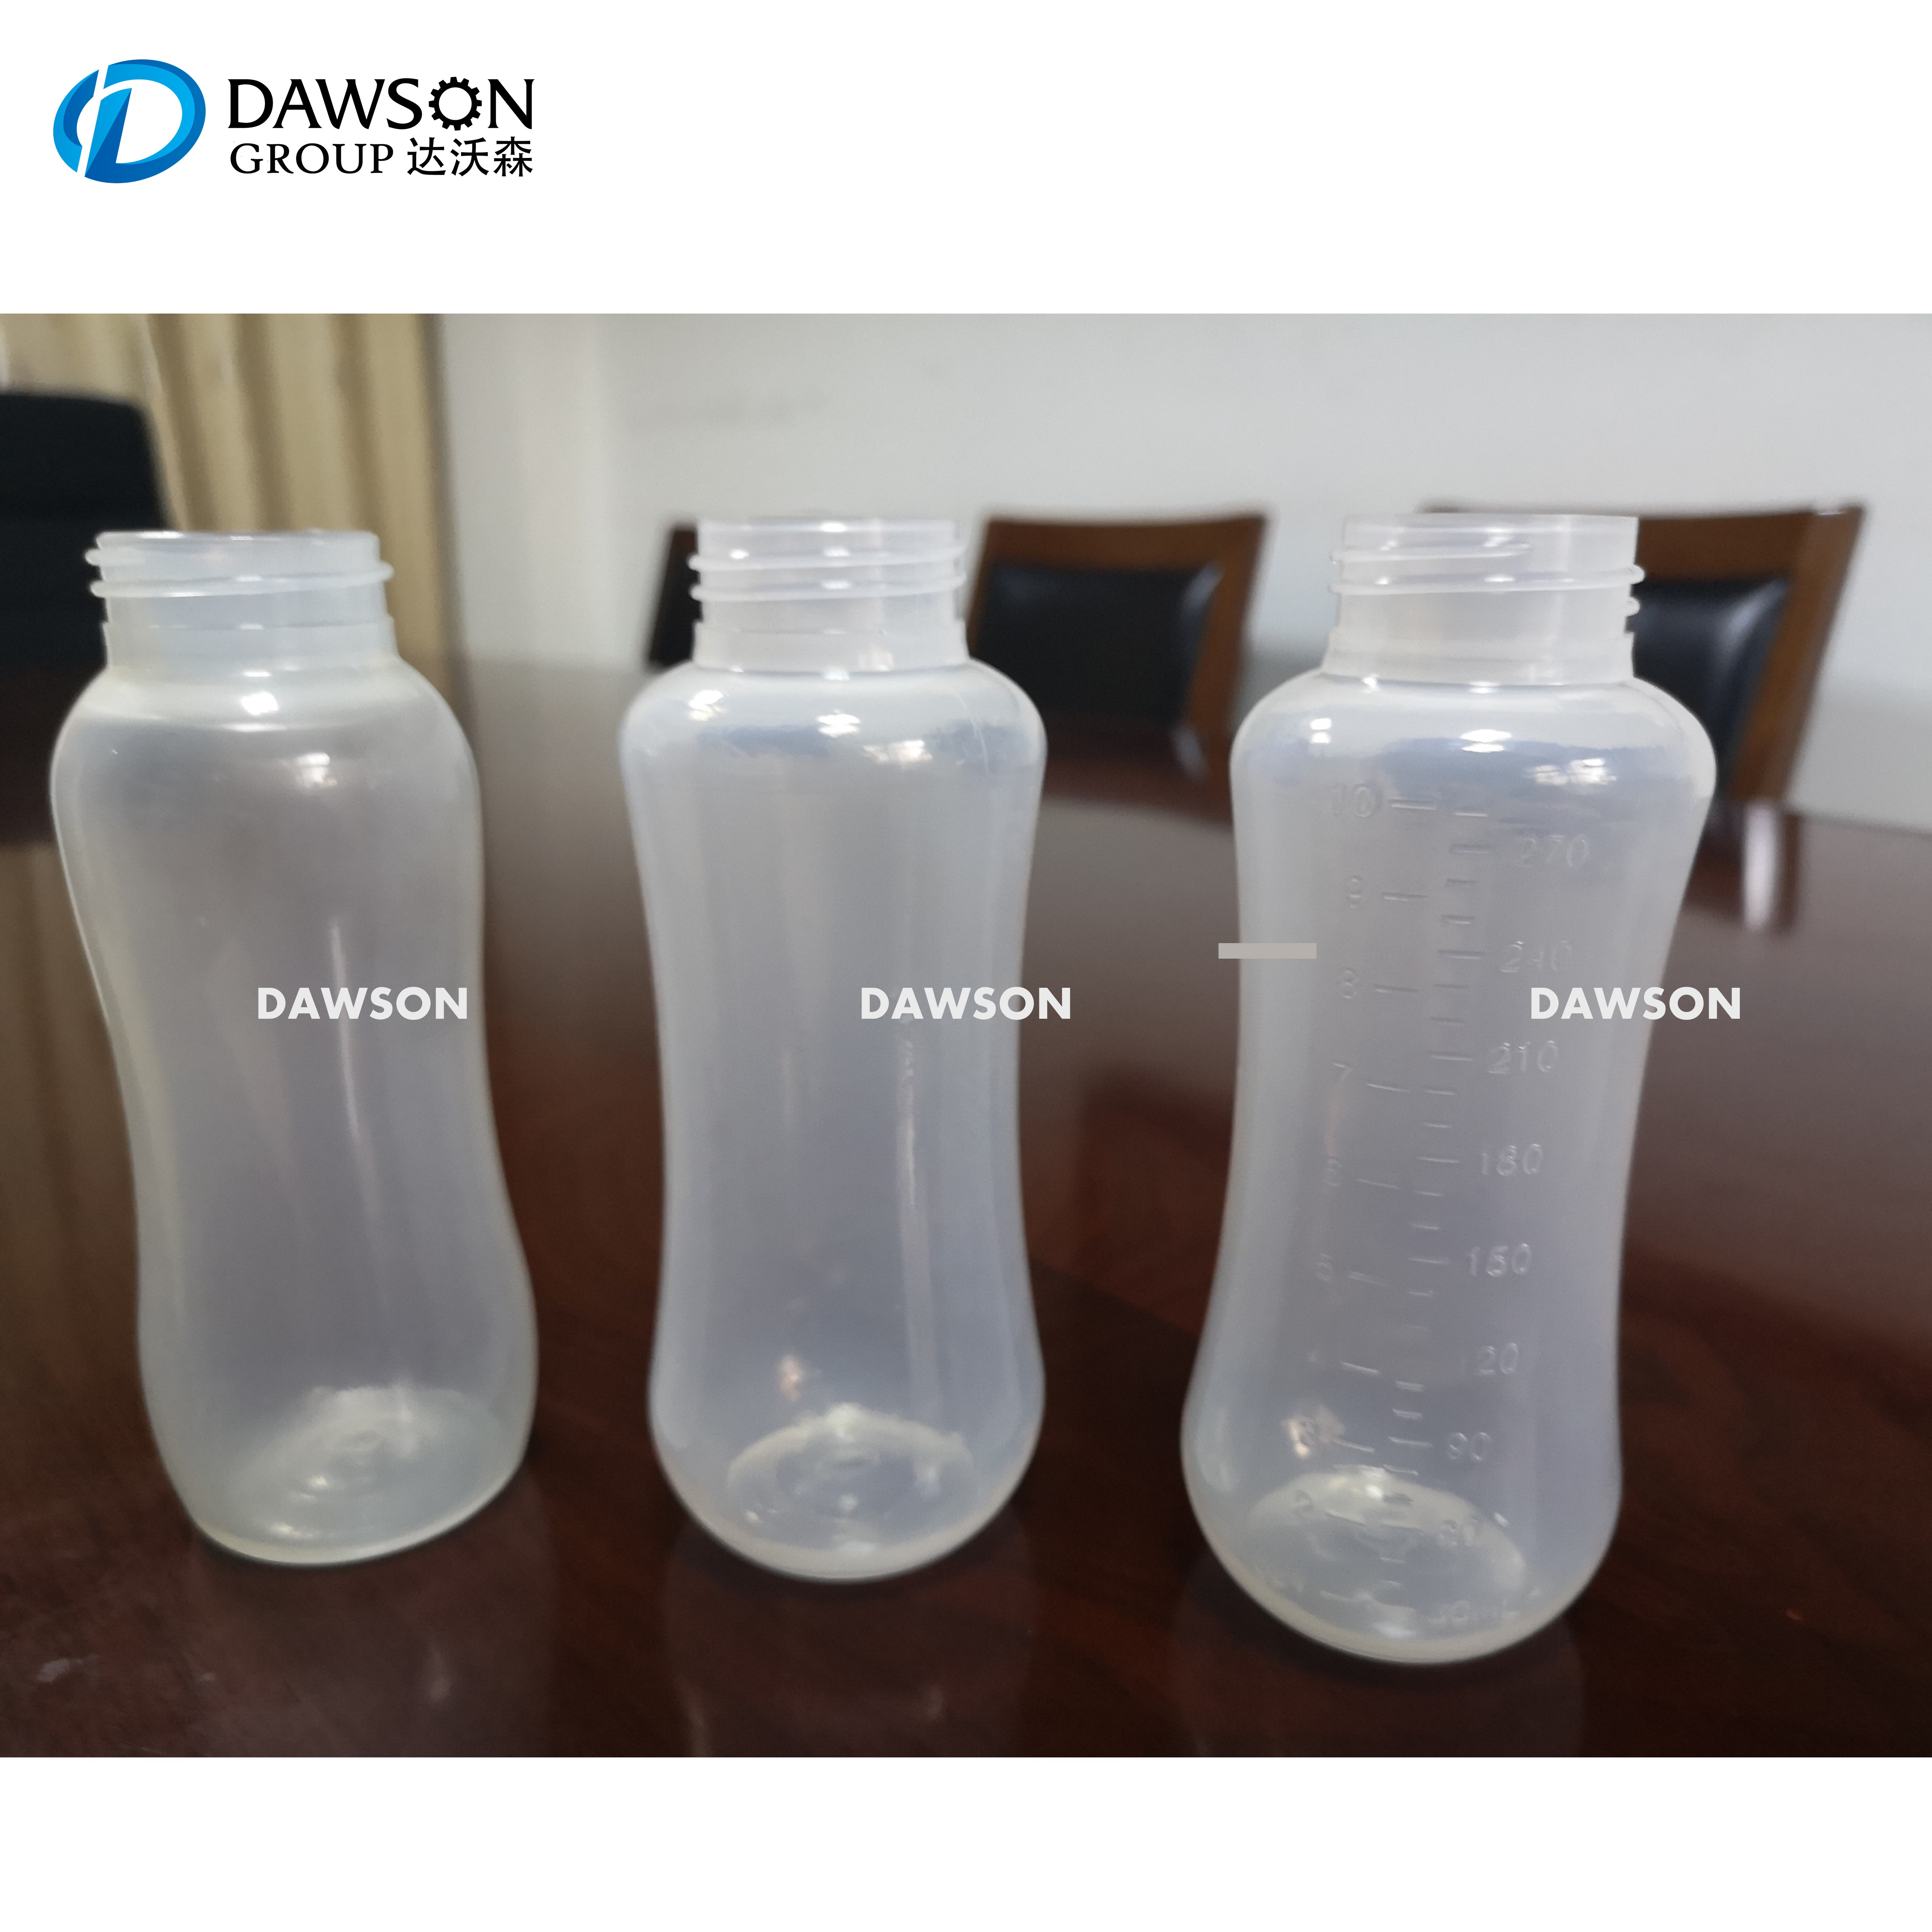 High speed baby feeding milk small bottle making price for injection blow plastic bottle machine